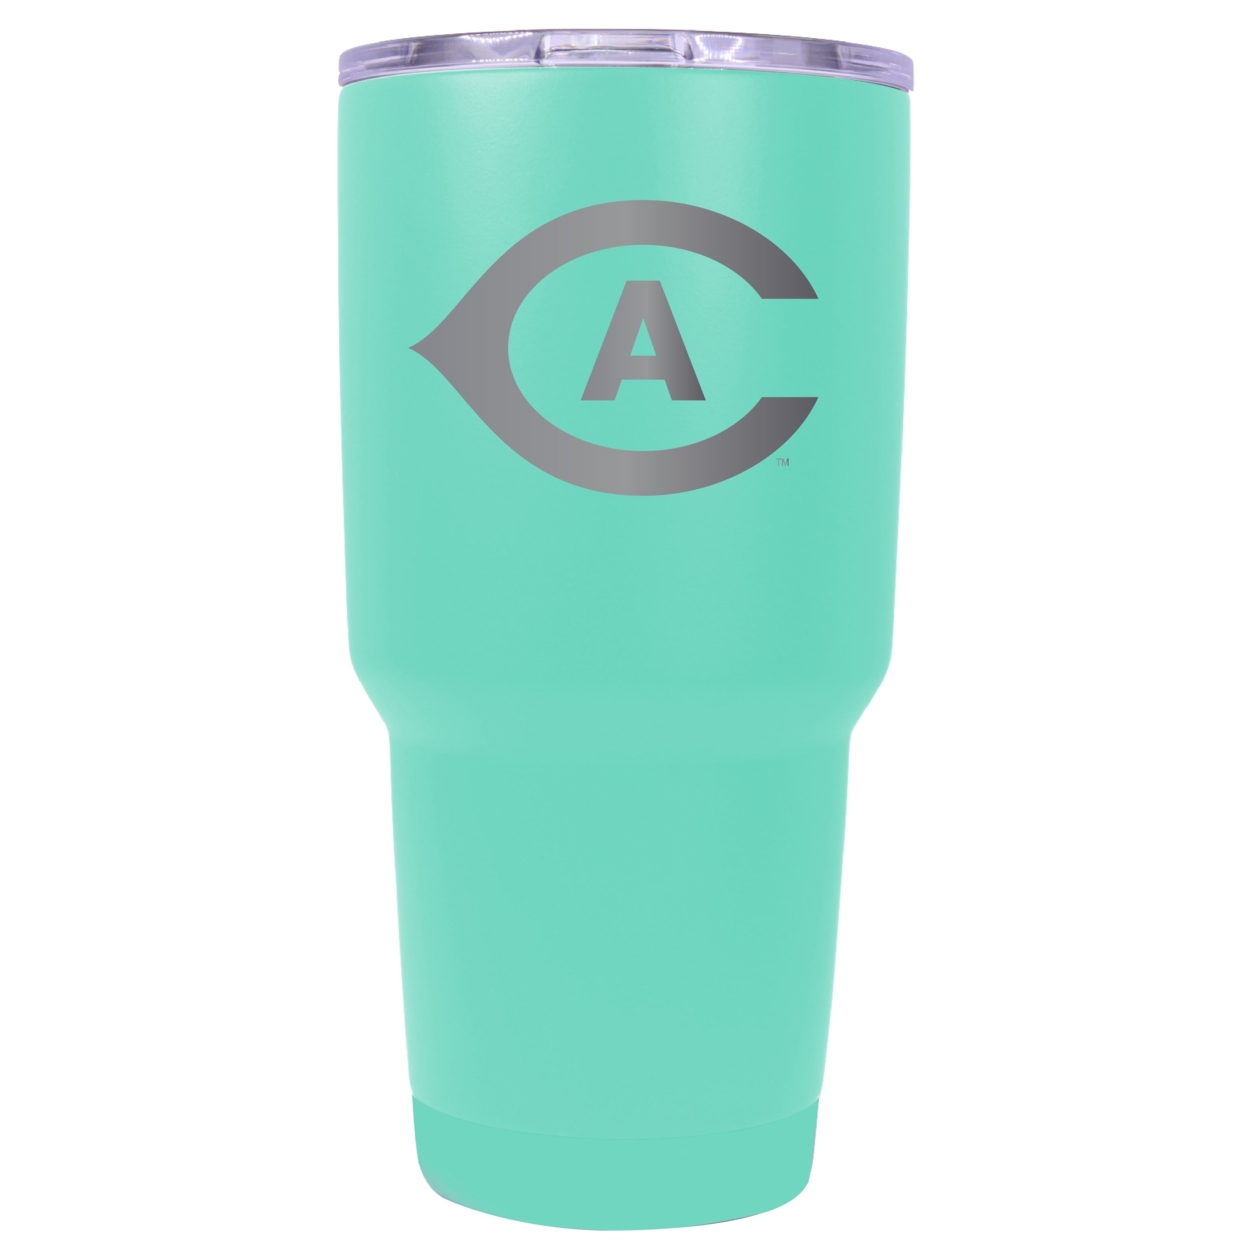 UC Davis Aggies 24 Oz Laser Engraved Stainless Steel Insulated Tumbler - Choose Your Color. - Seafoam